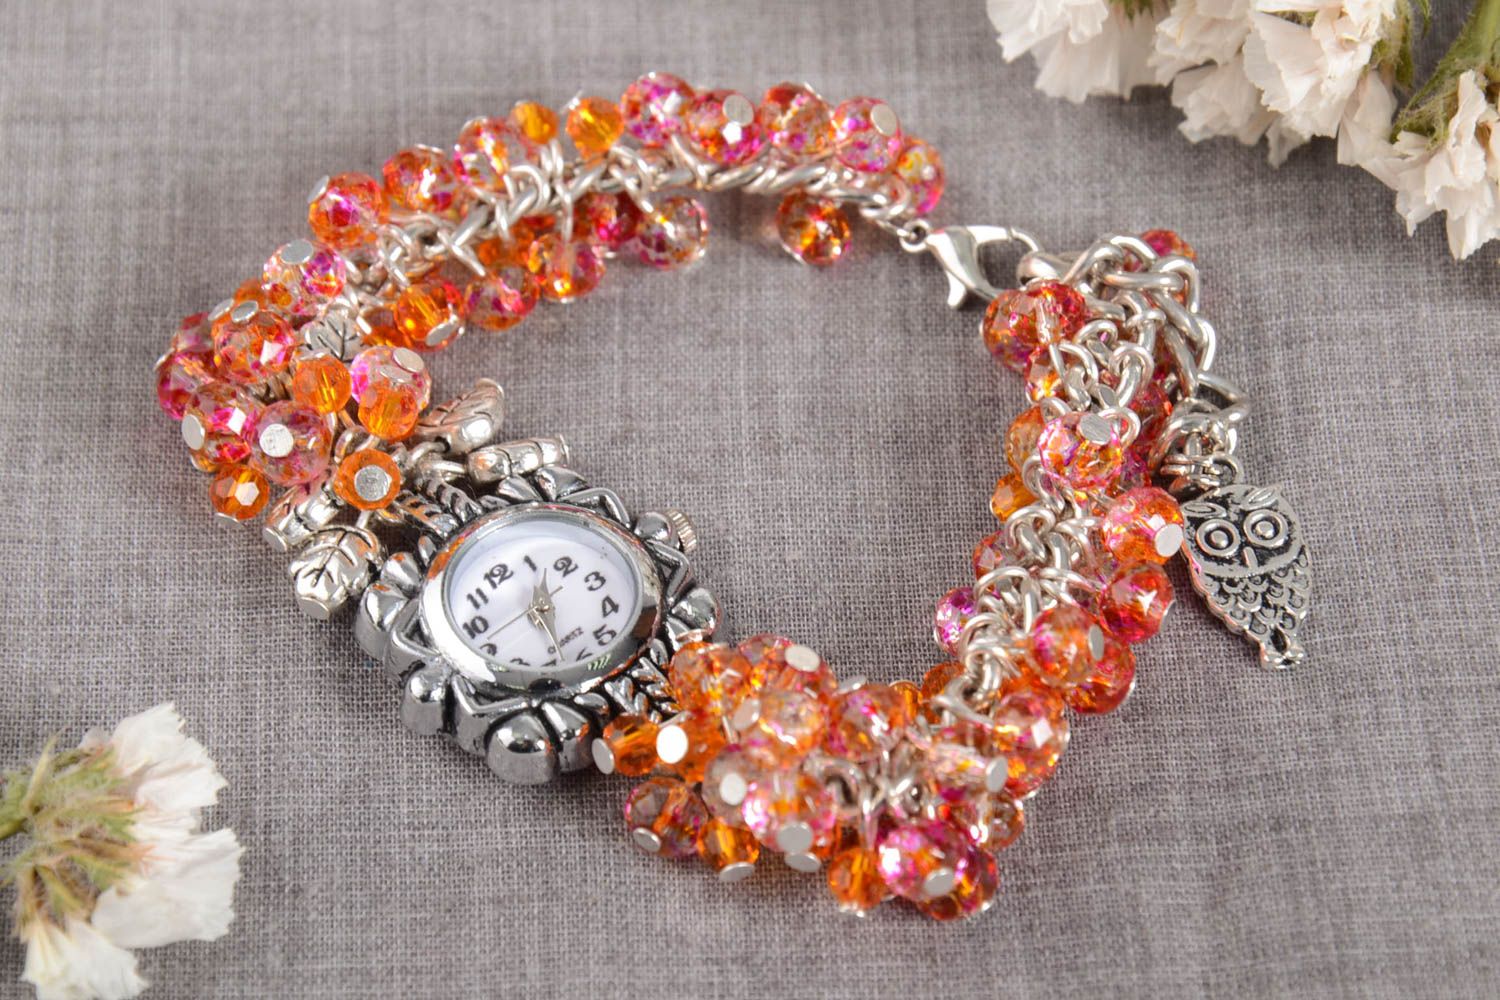 Buy Mikado Pearl Crystal Bead Strap Bracelet Watch for Women at Amazon.in